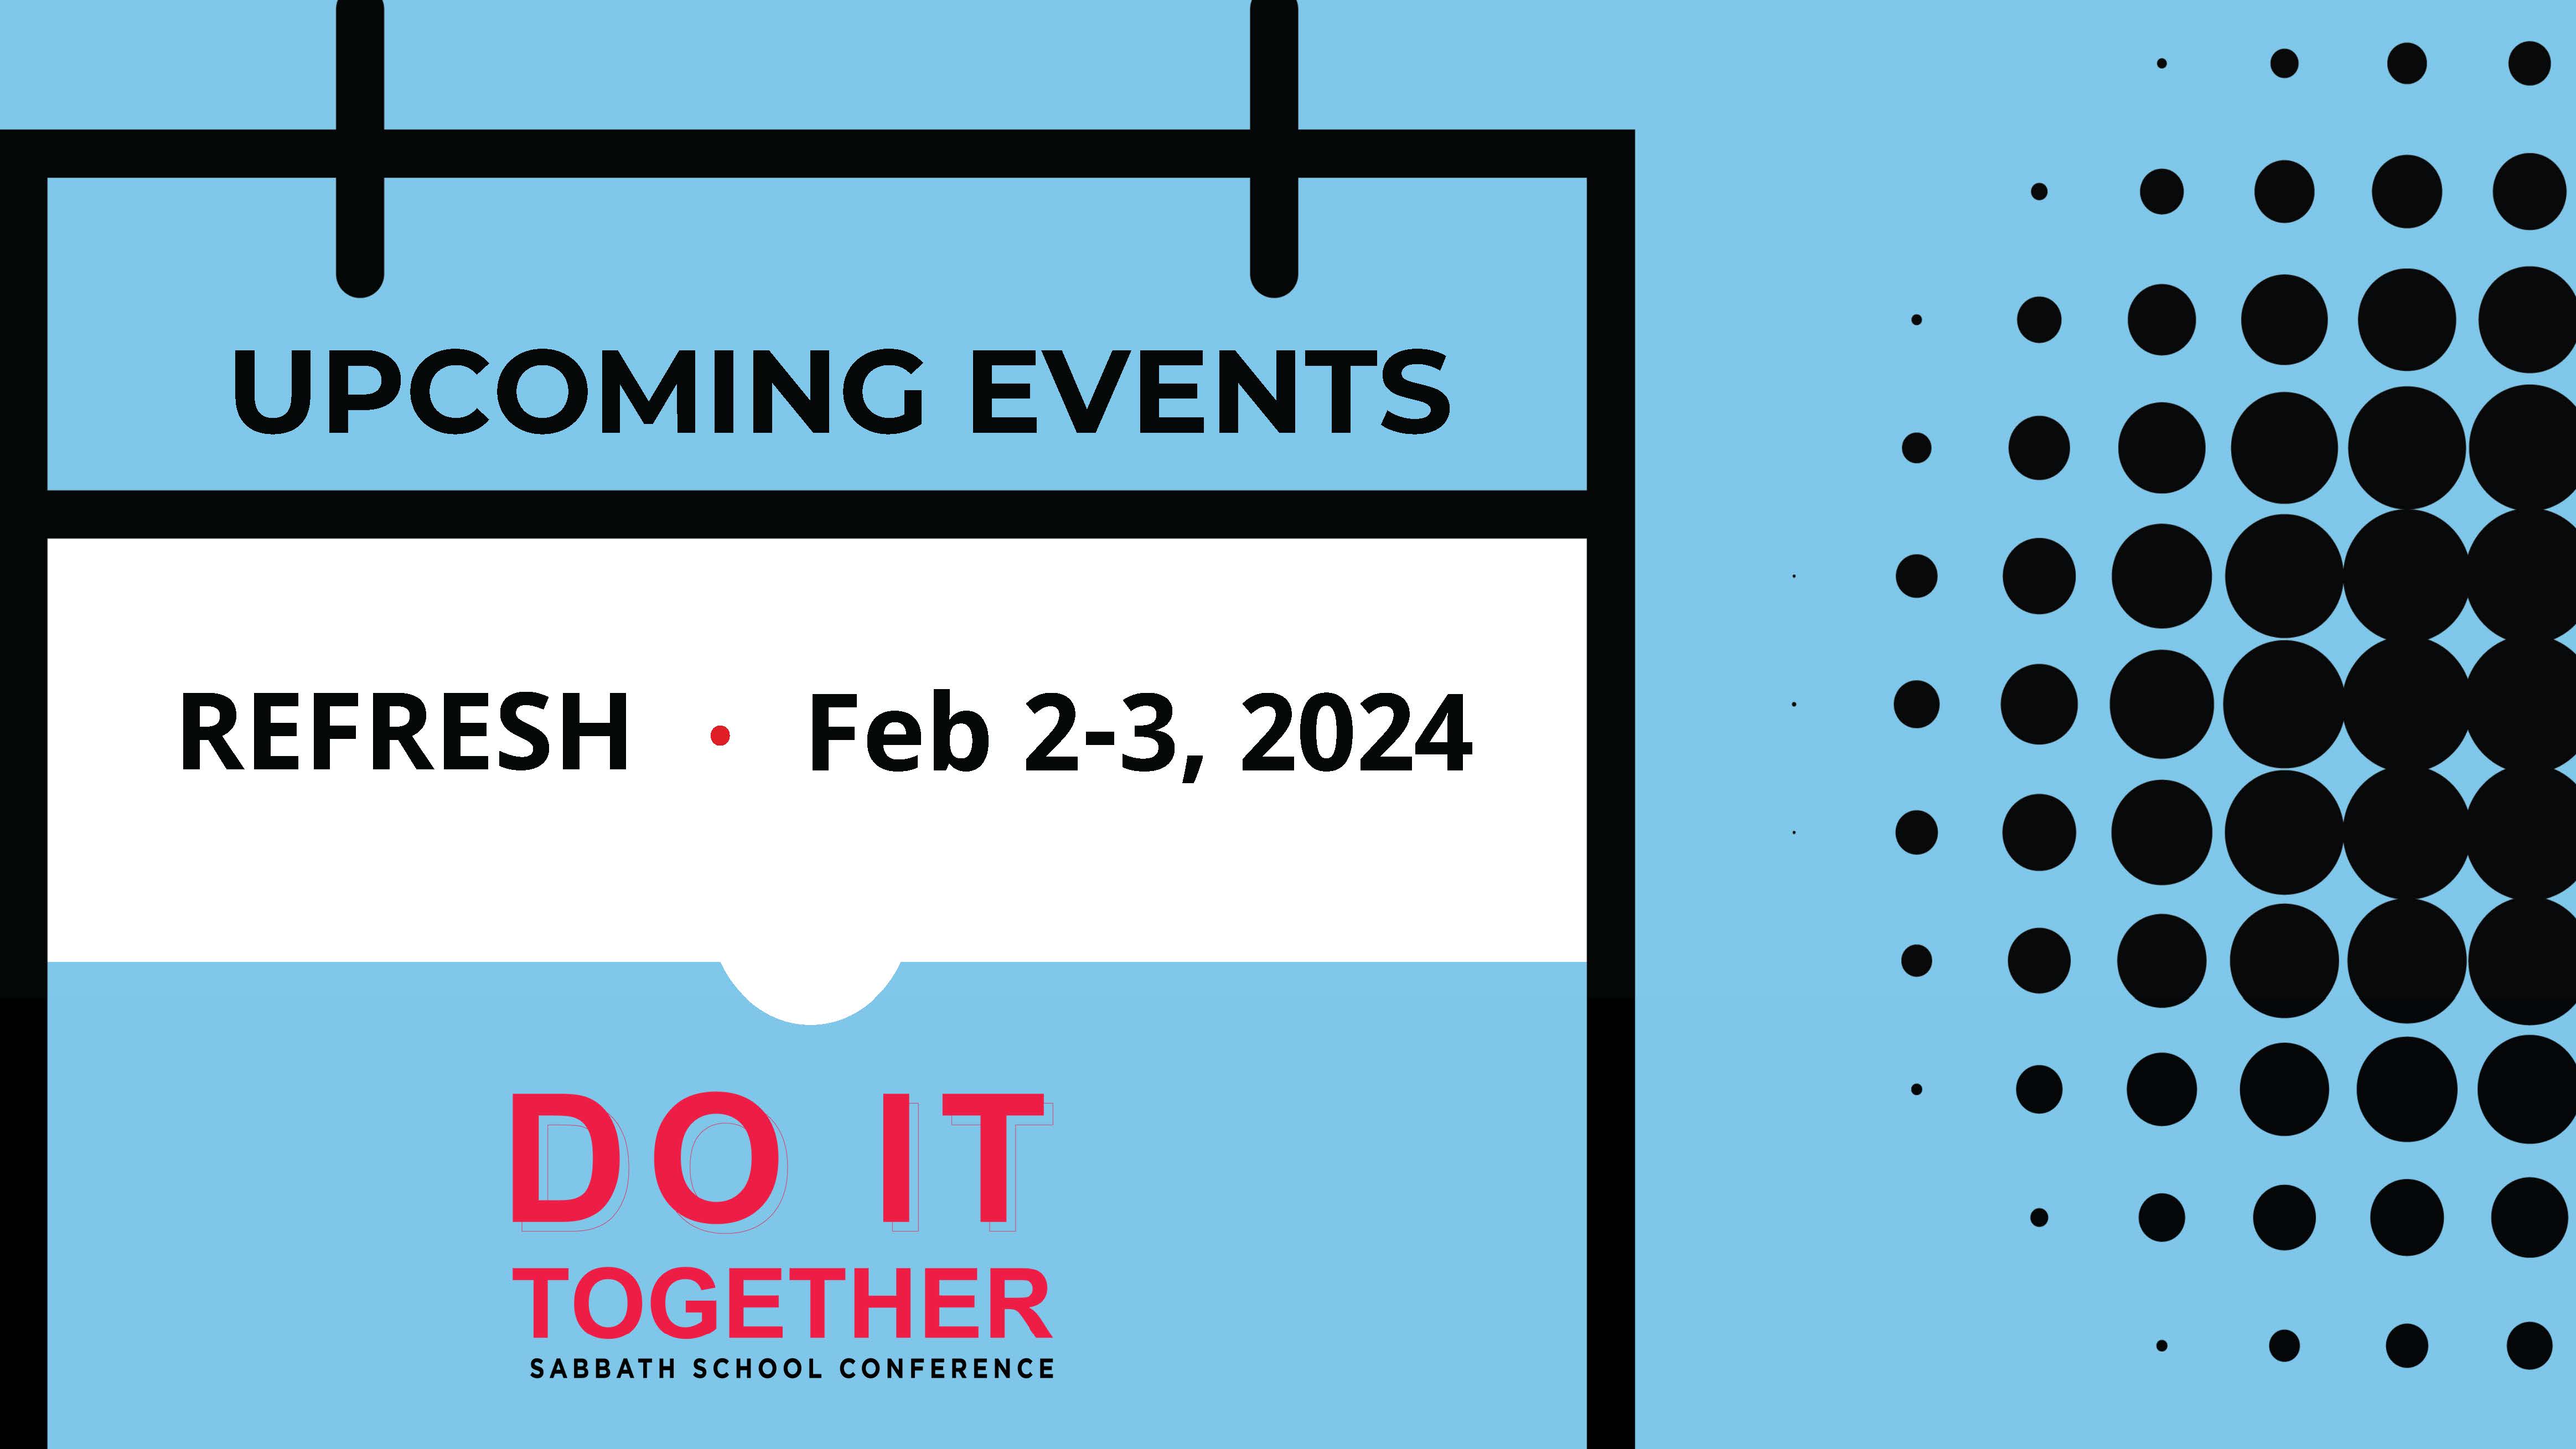 Do It Together Sabbath School virtual convention coming in February 2024